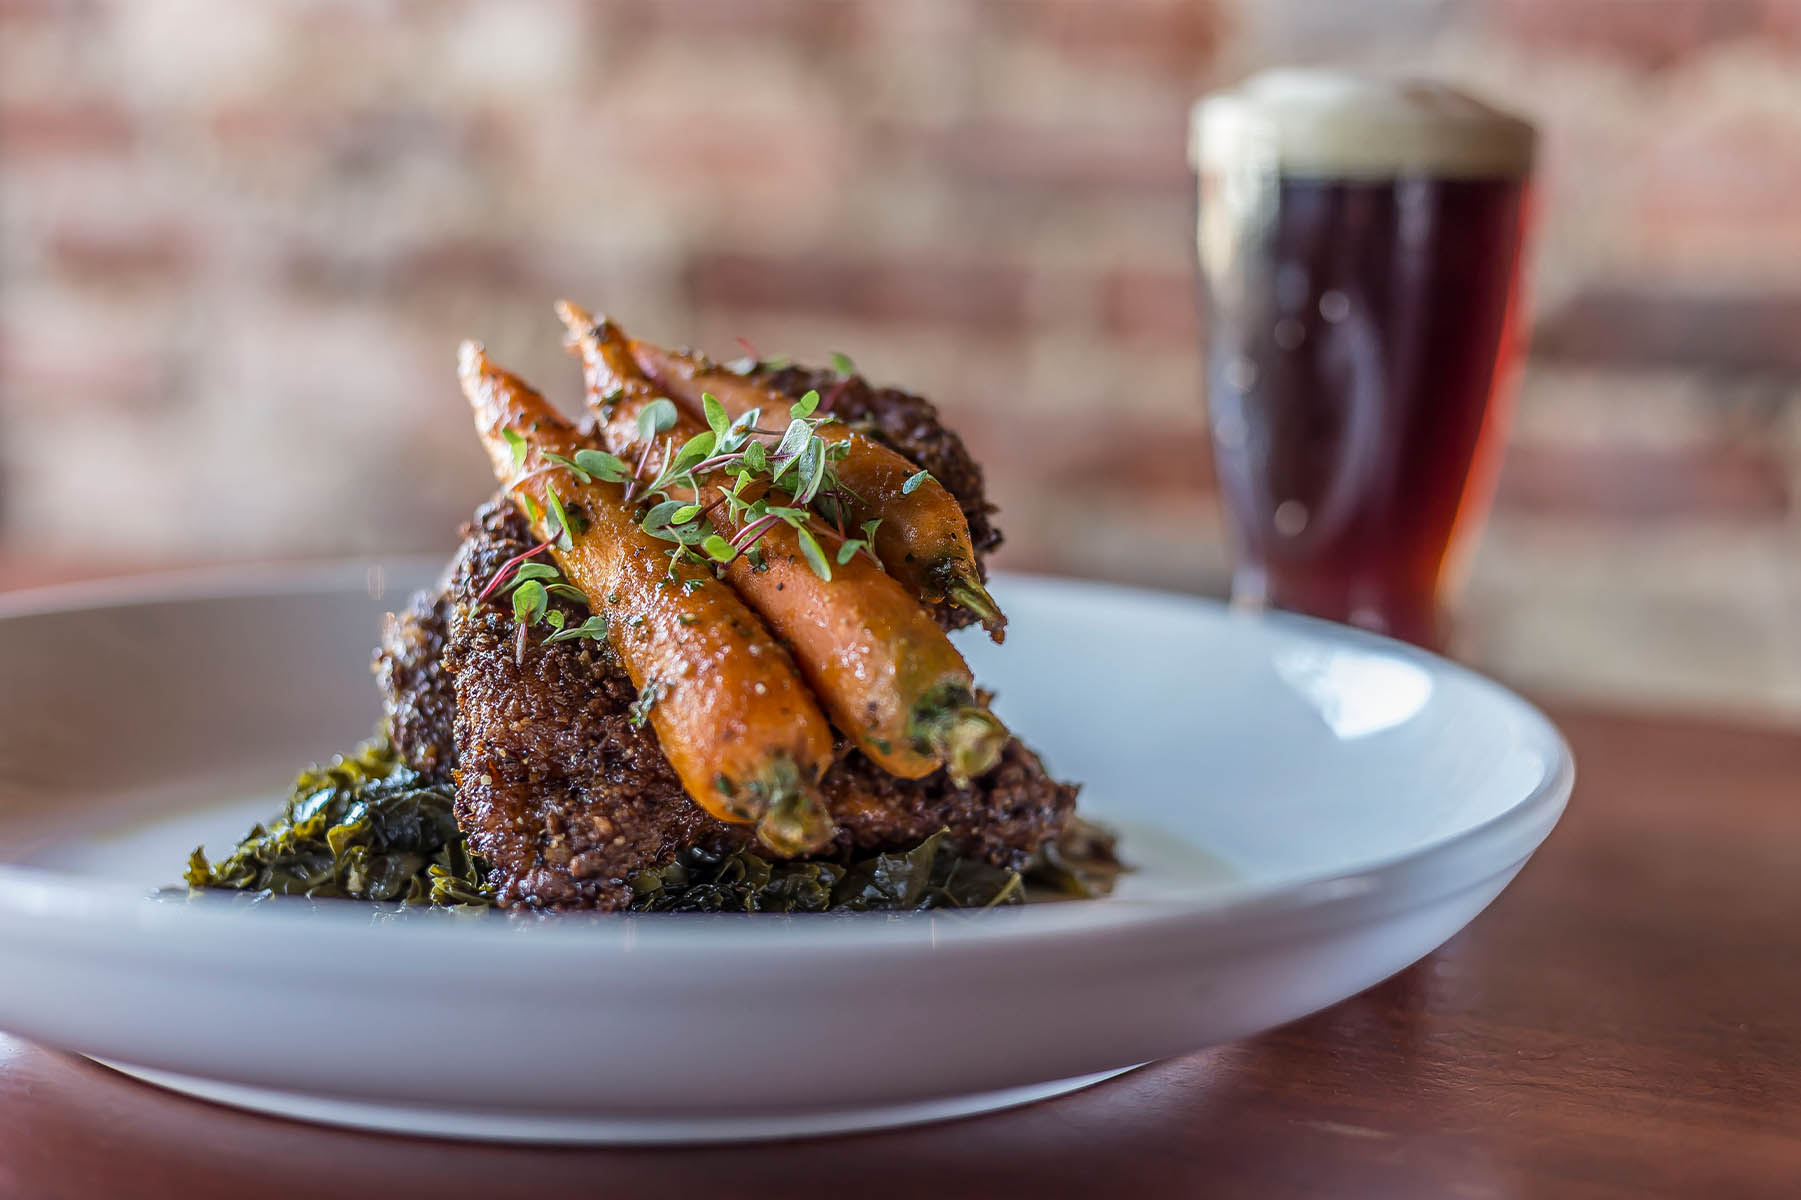 Food photography: A fancy dish topped with carrots and a beer in the background.